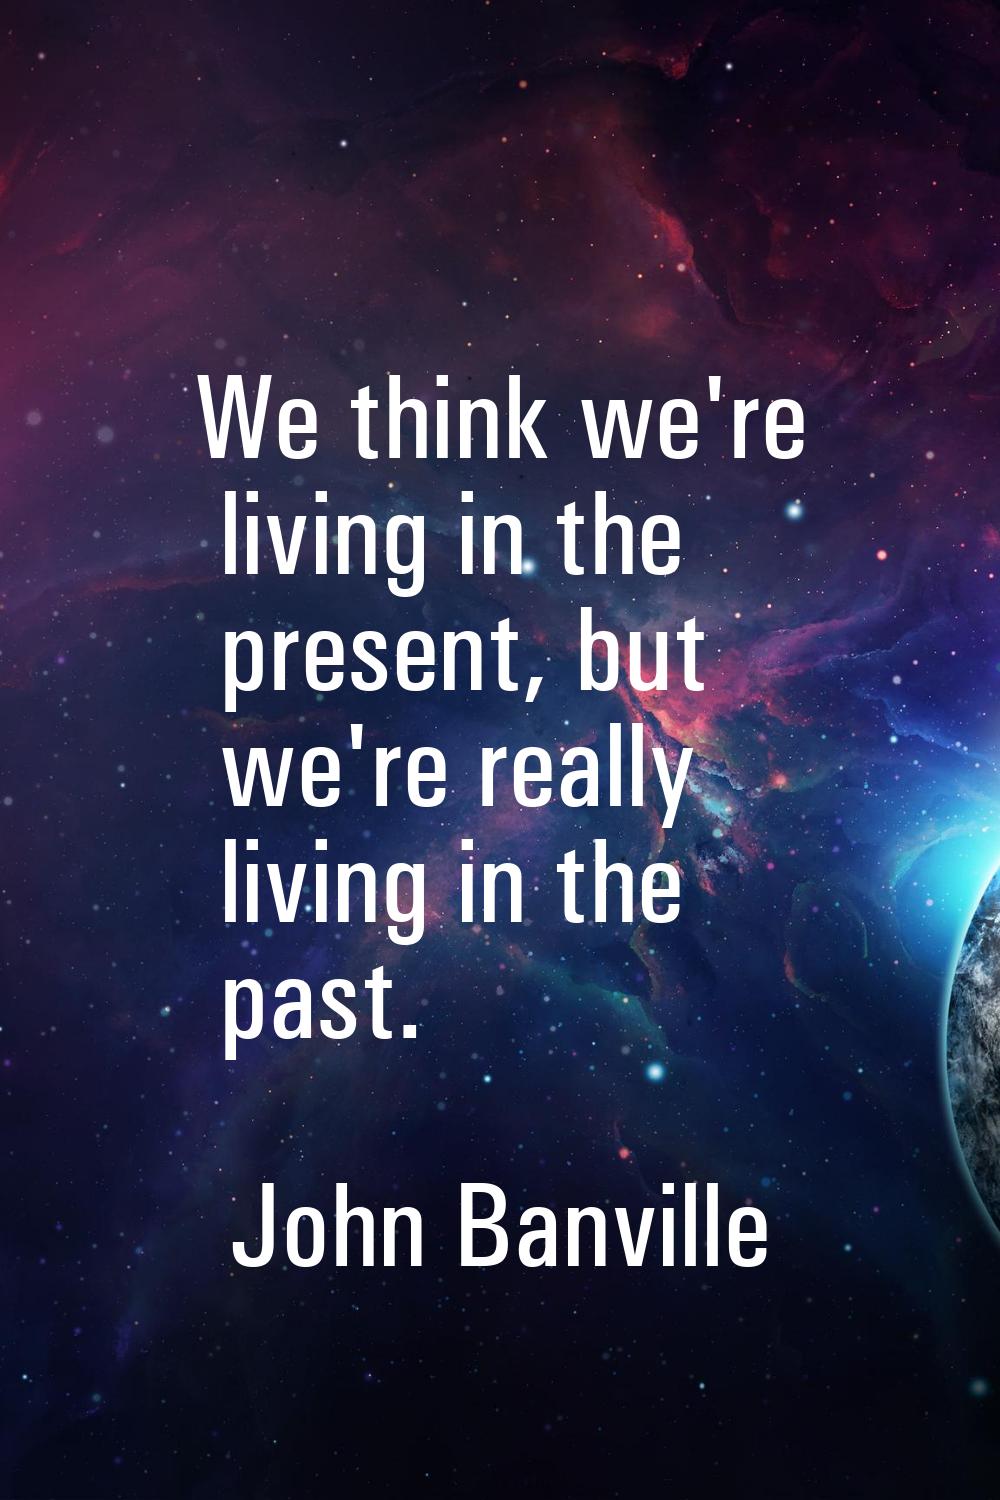 We think we're living in the present, but we're really living in the past.